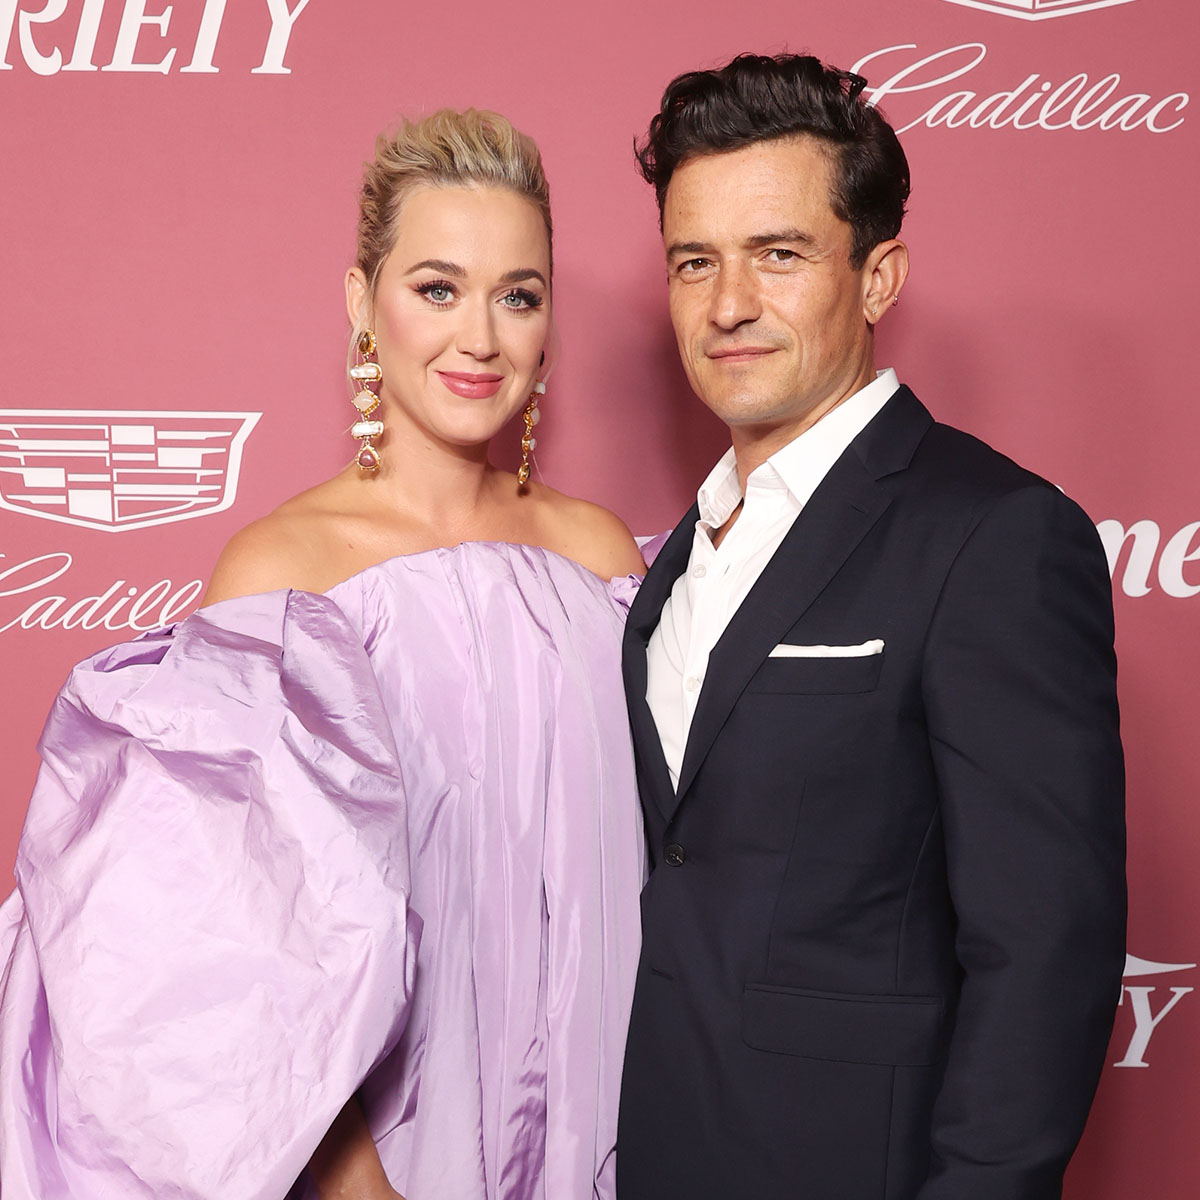 Orlando Bloom’s Shirtless Style Leaves Katy Perry Walking on Air